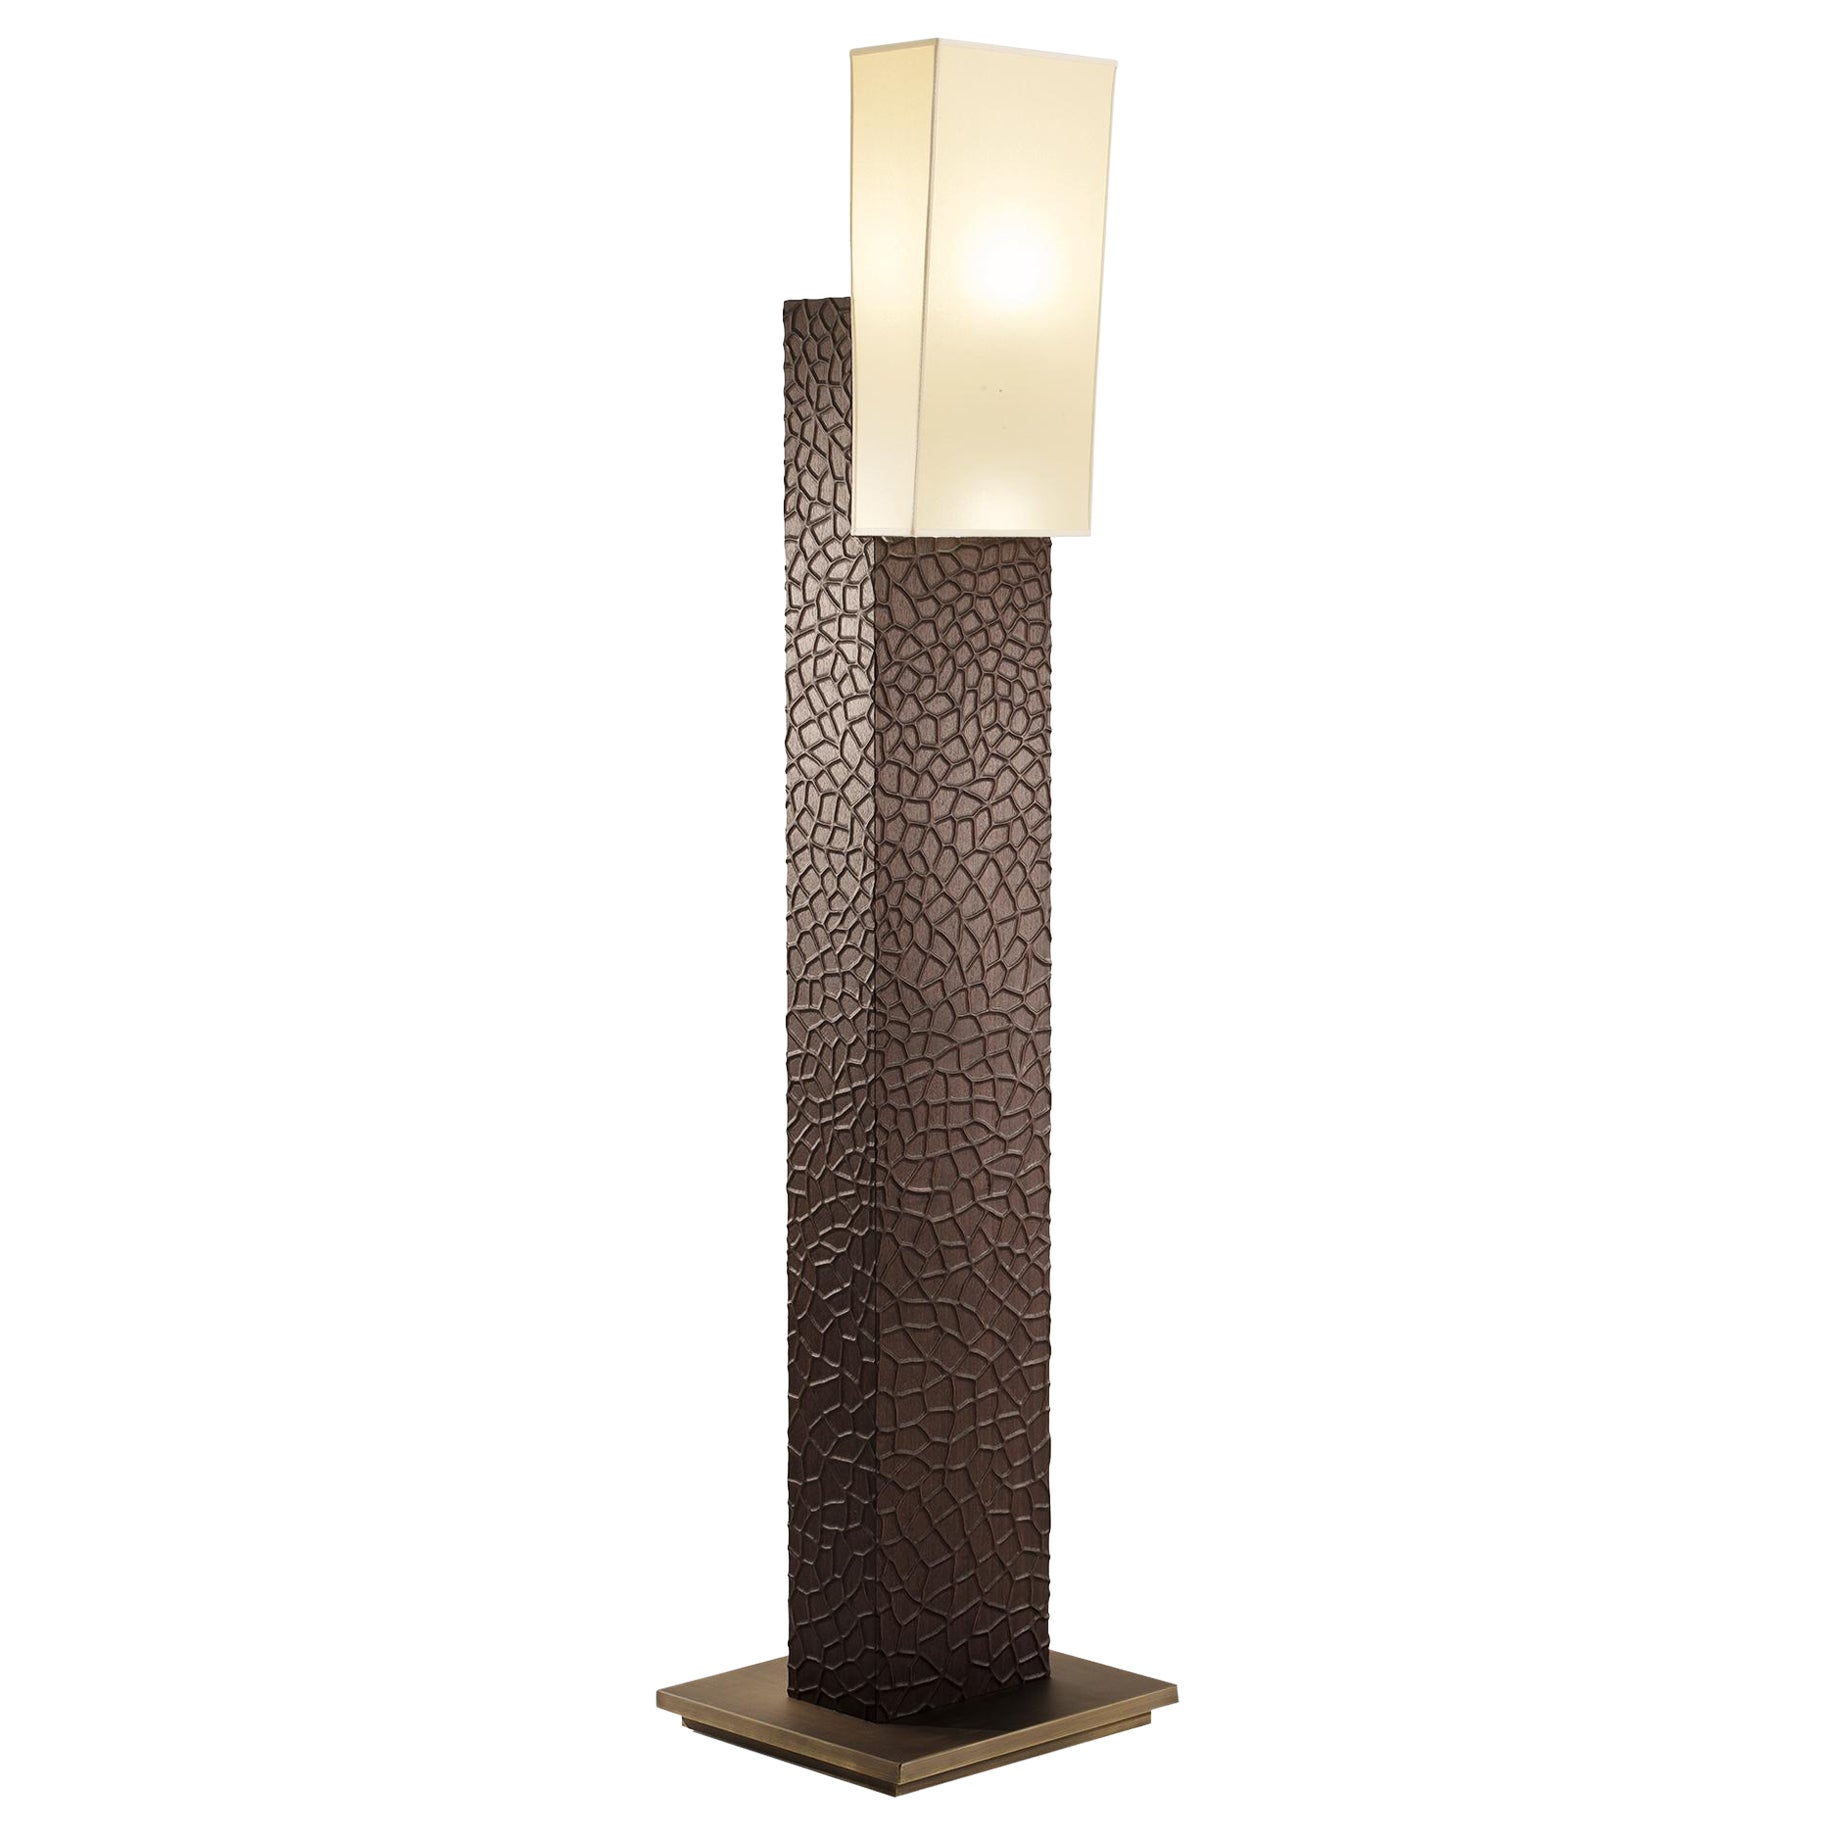 Theba Floor Lamp with Wooden Column, Parchment Shade and Bronzed Base